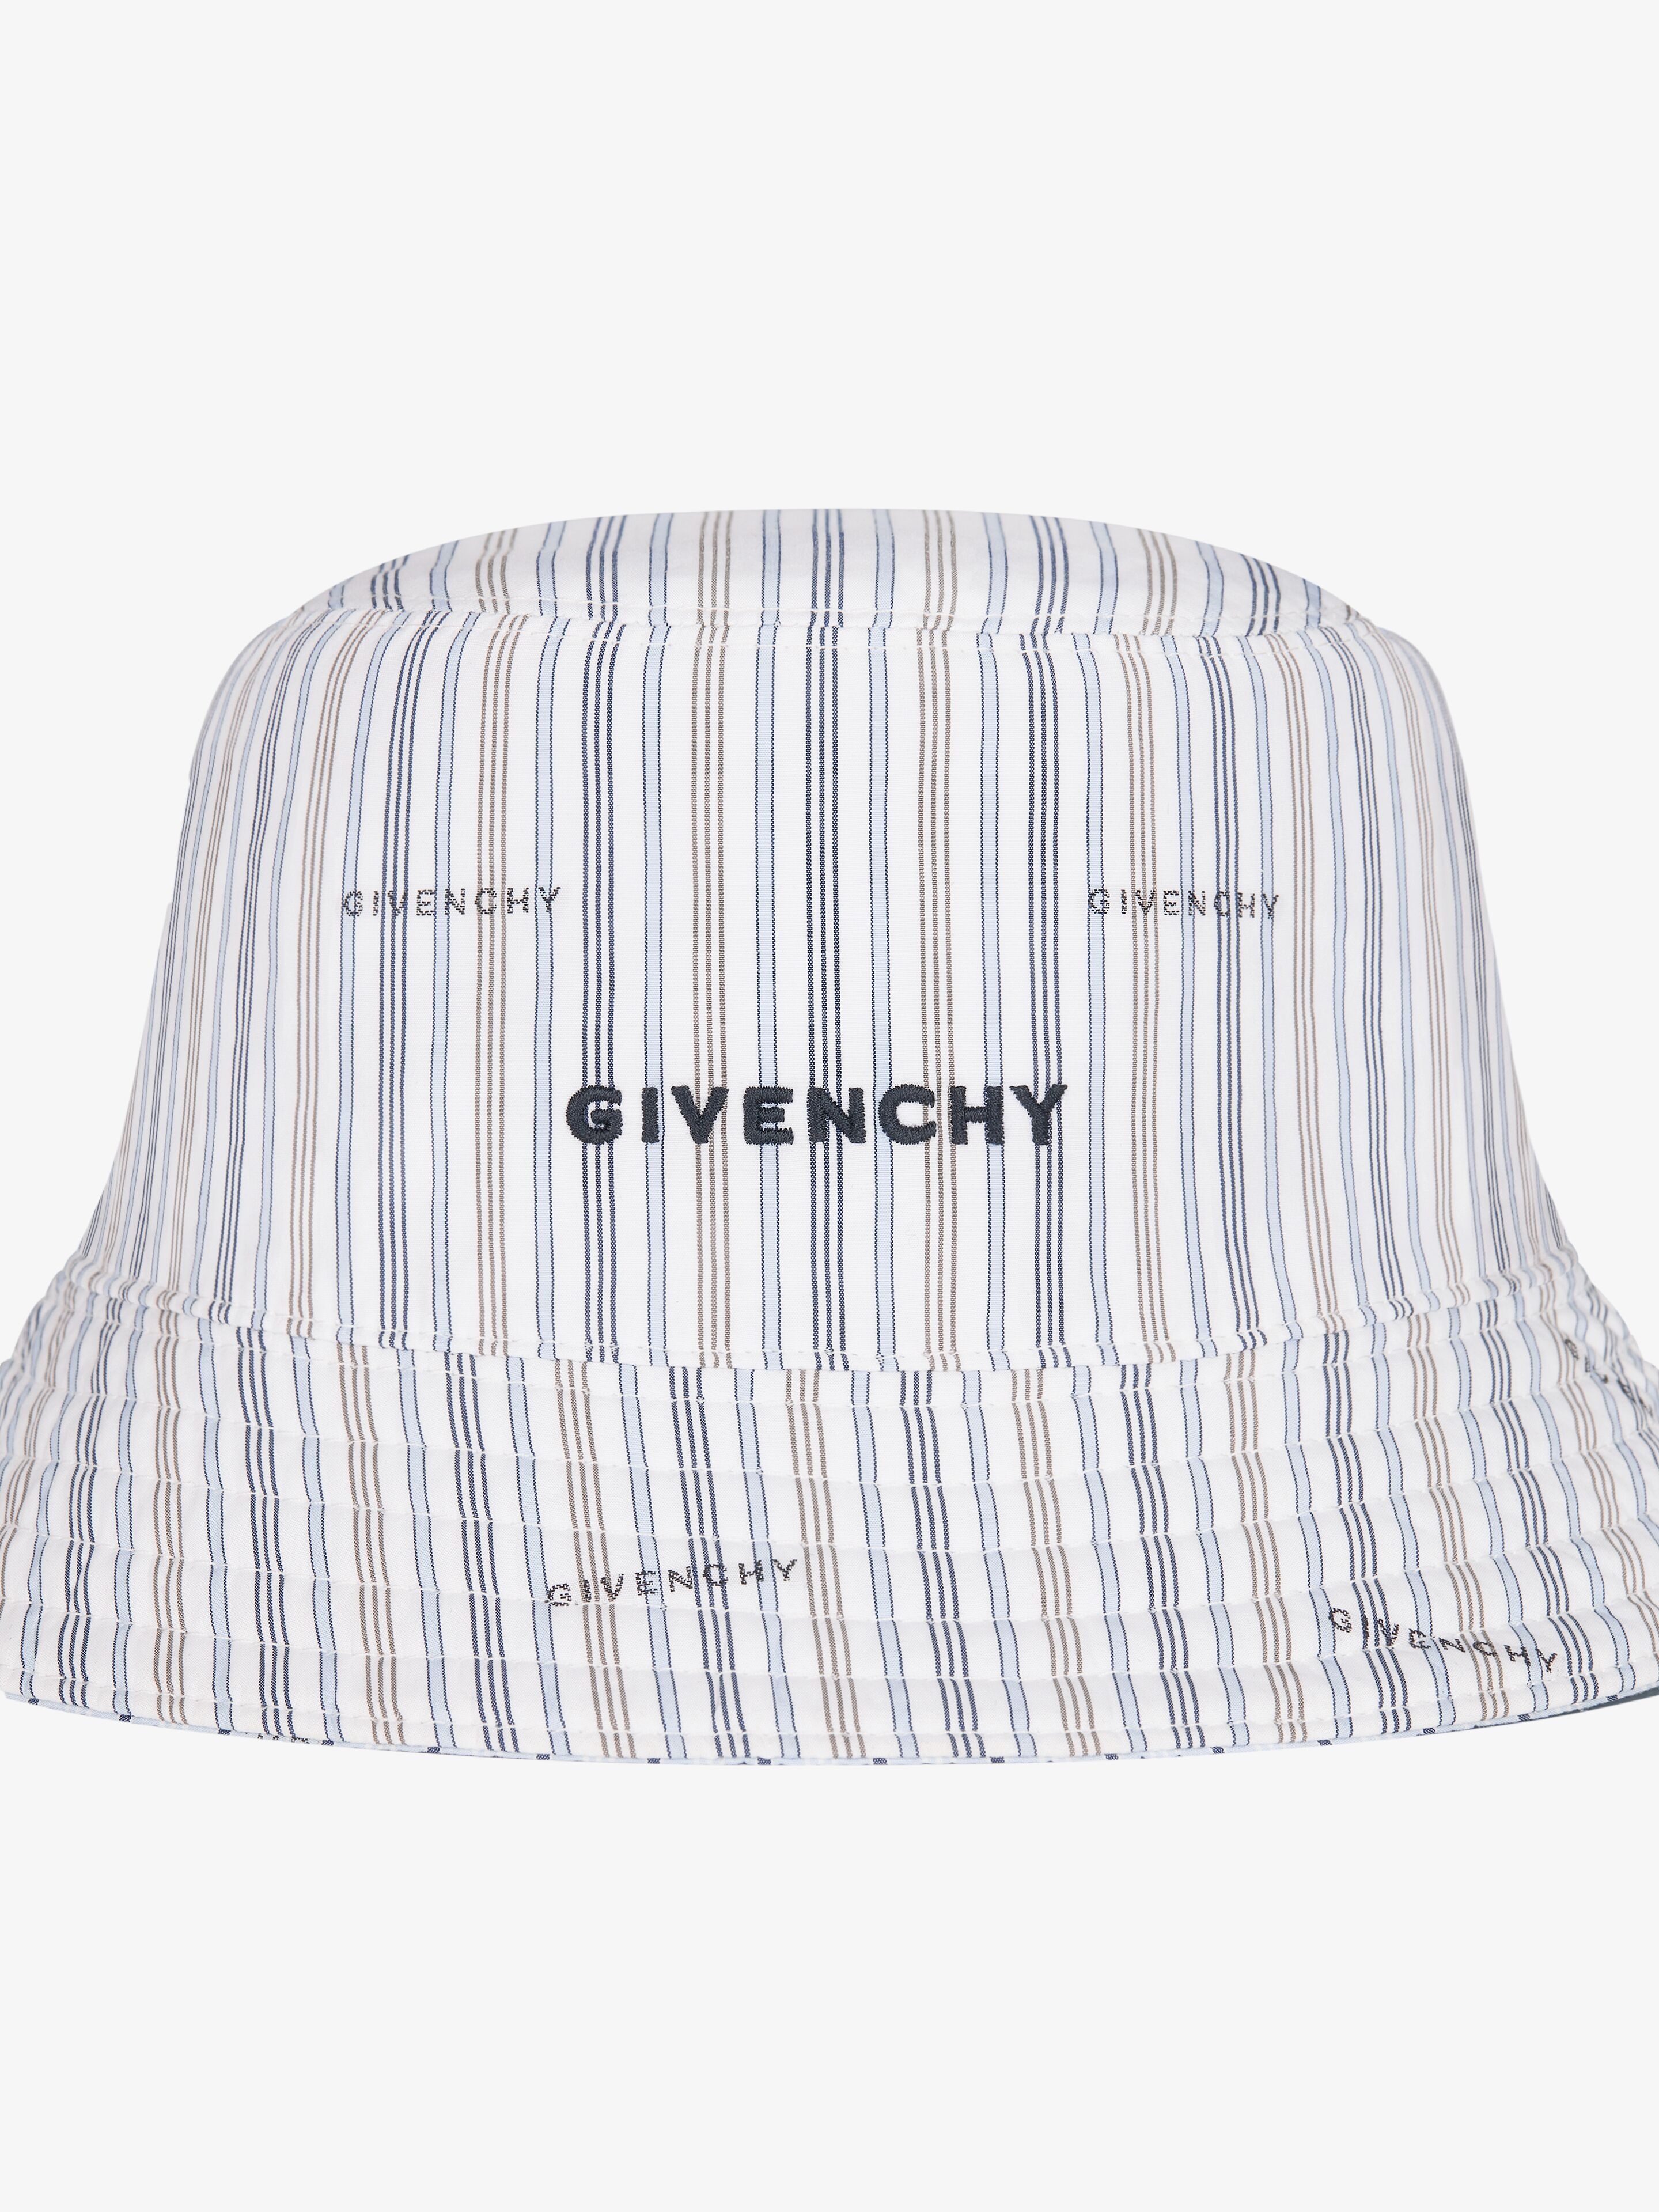 REVERSIBLE GIVENCHY BUCKET HAT - 6